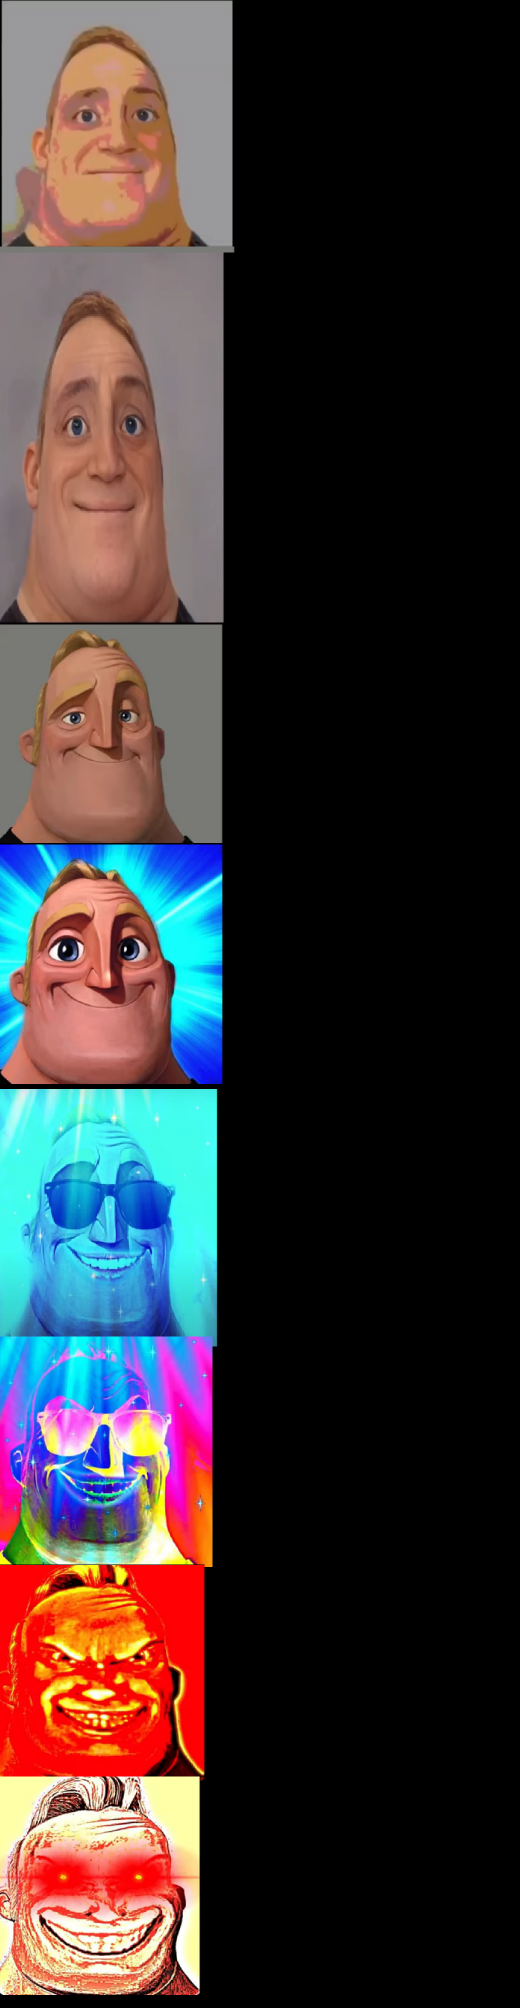 mr incredible becoming happy(canny) Blank Meme Template